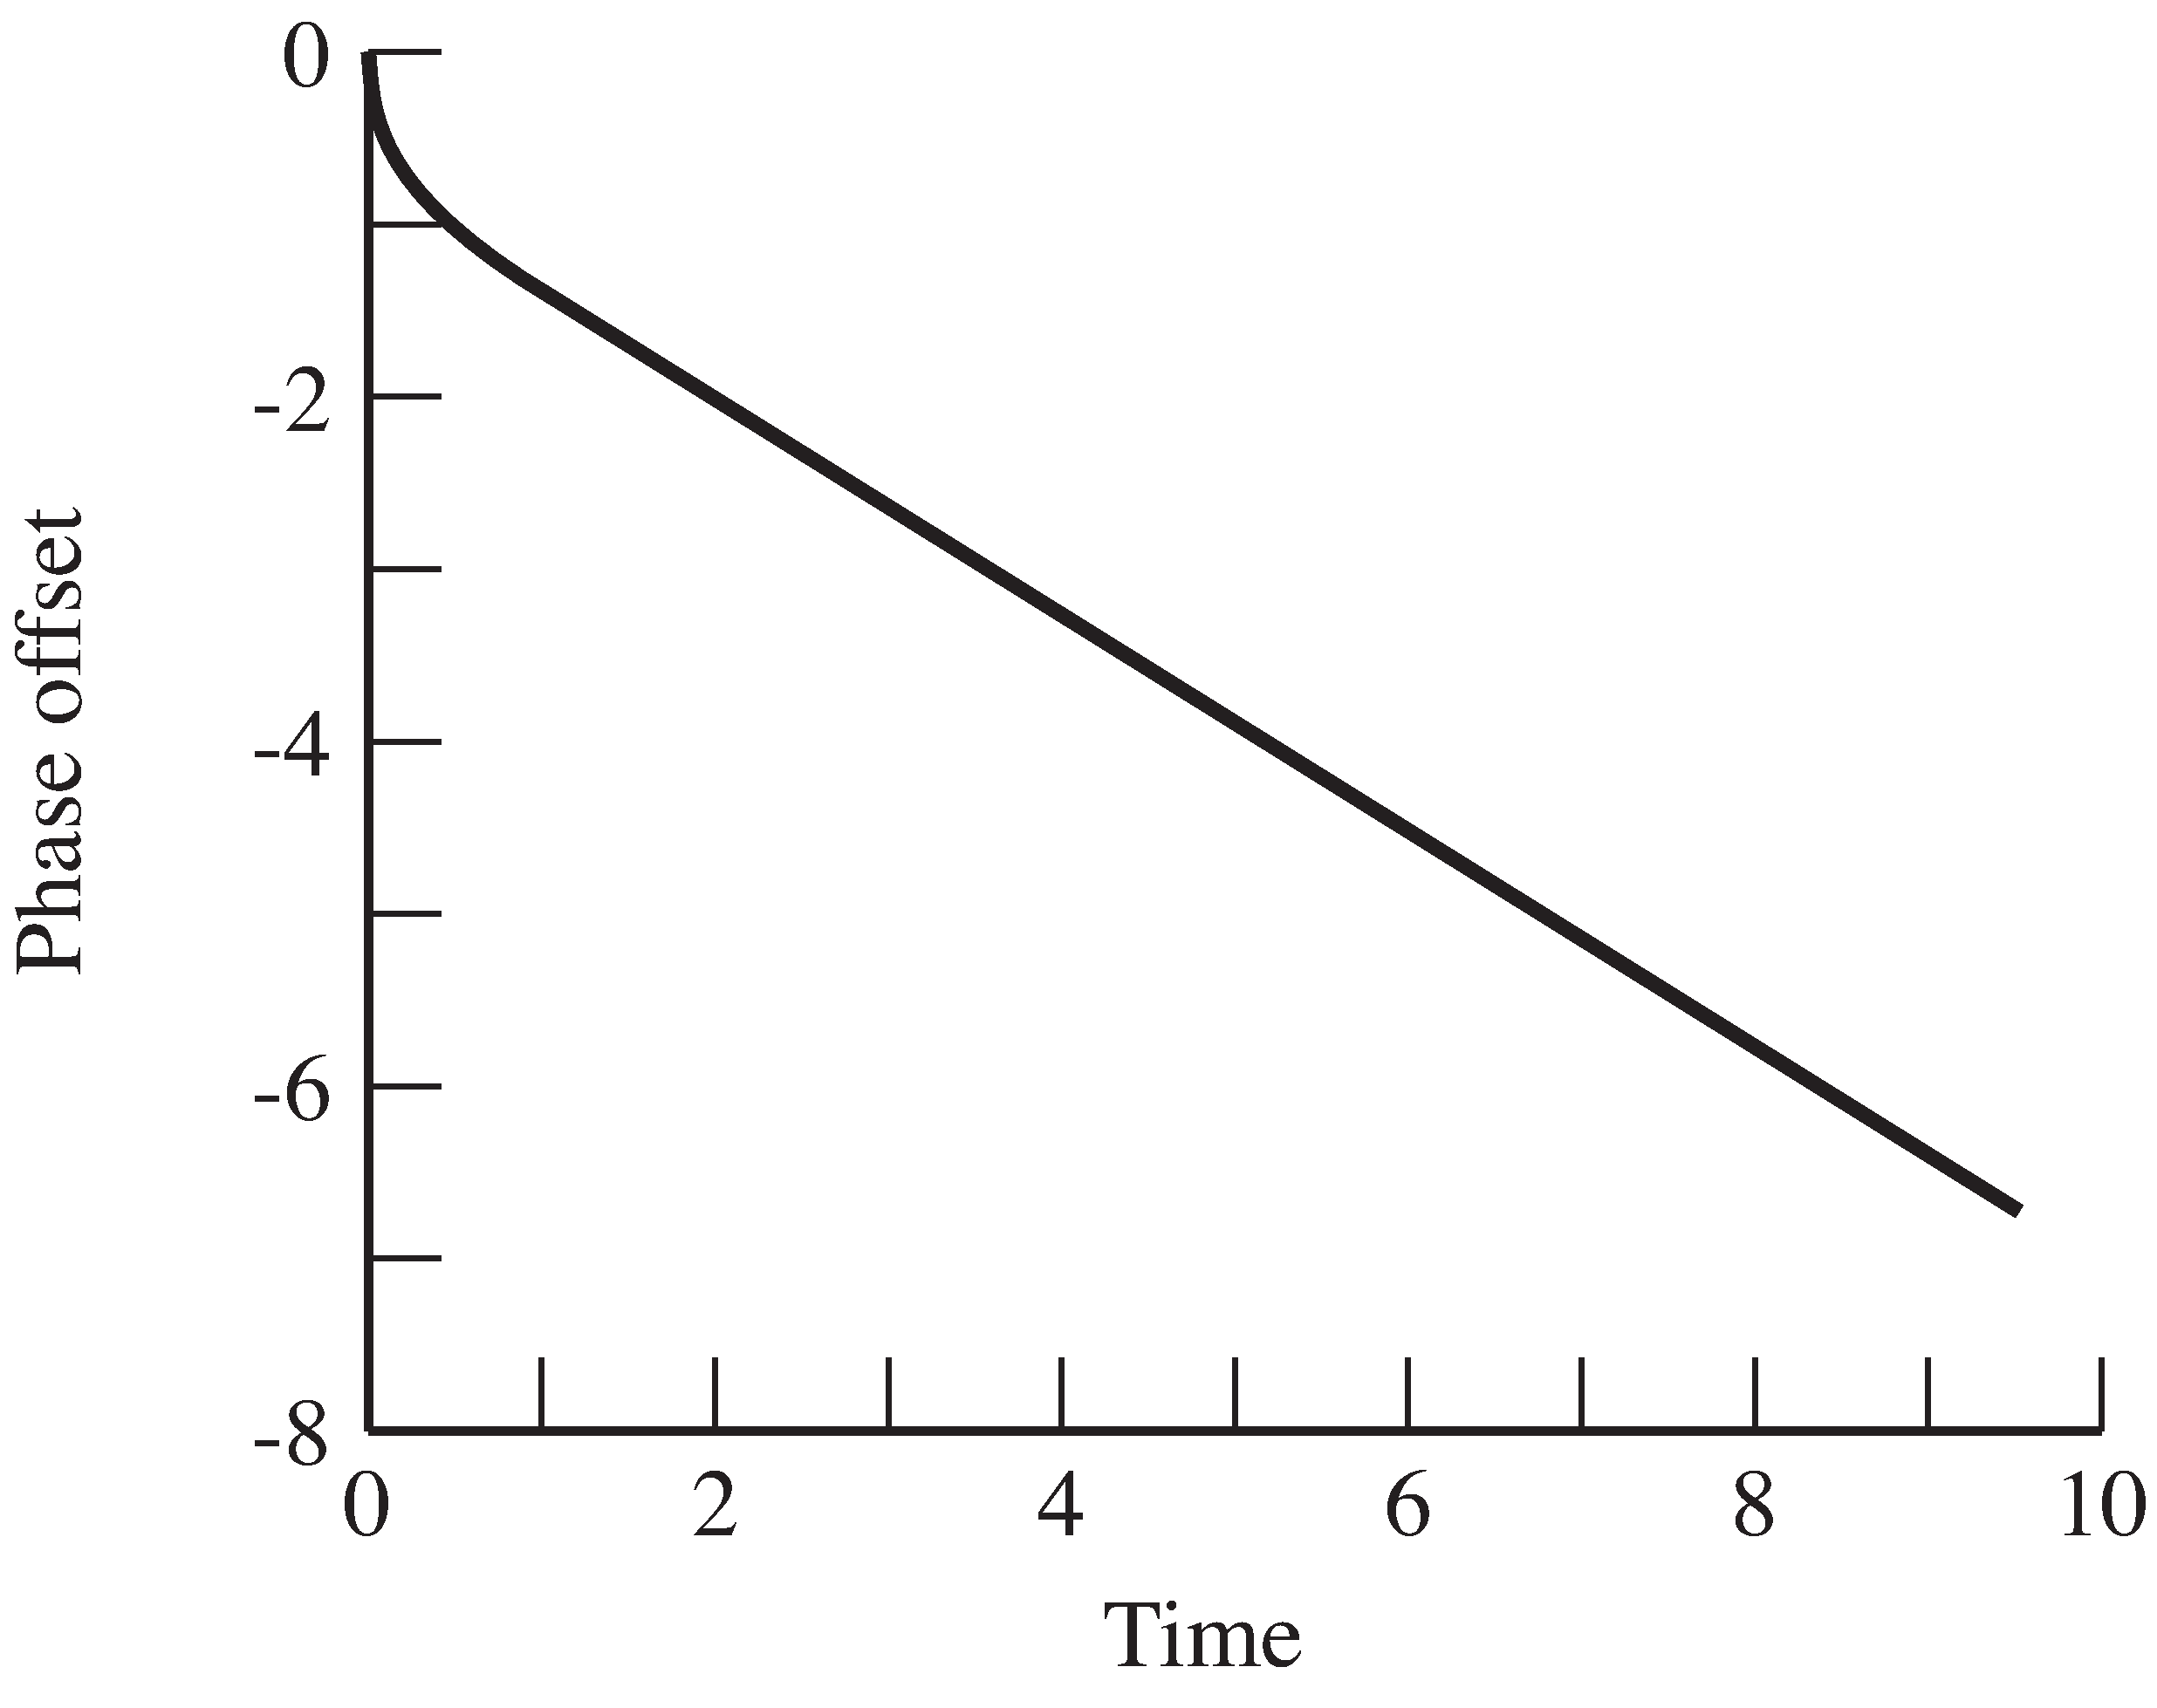 When the frequency estimate is incorrect, θ becomes a “line” whose slope is proportional to the frequency difference.